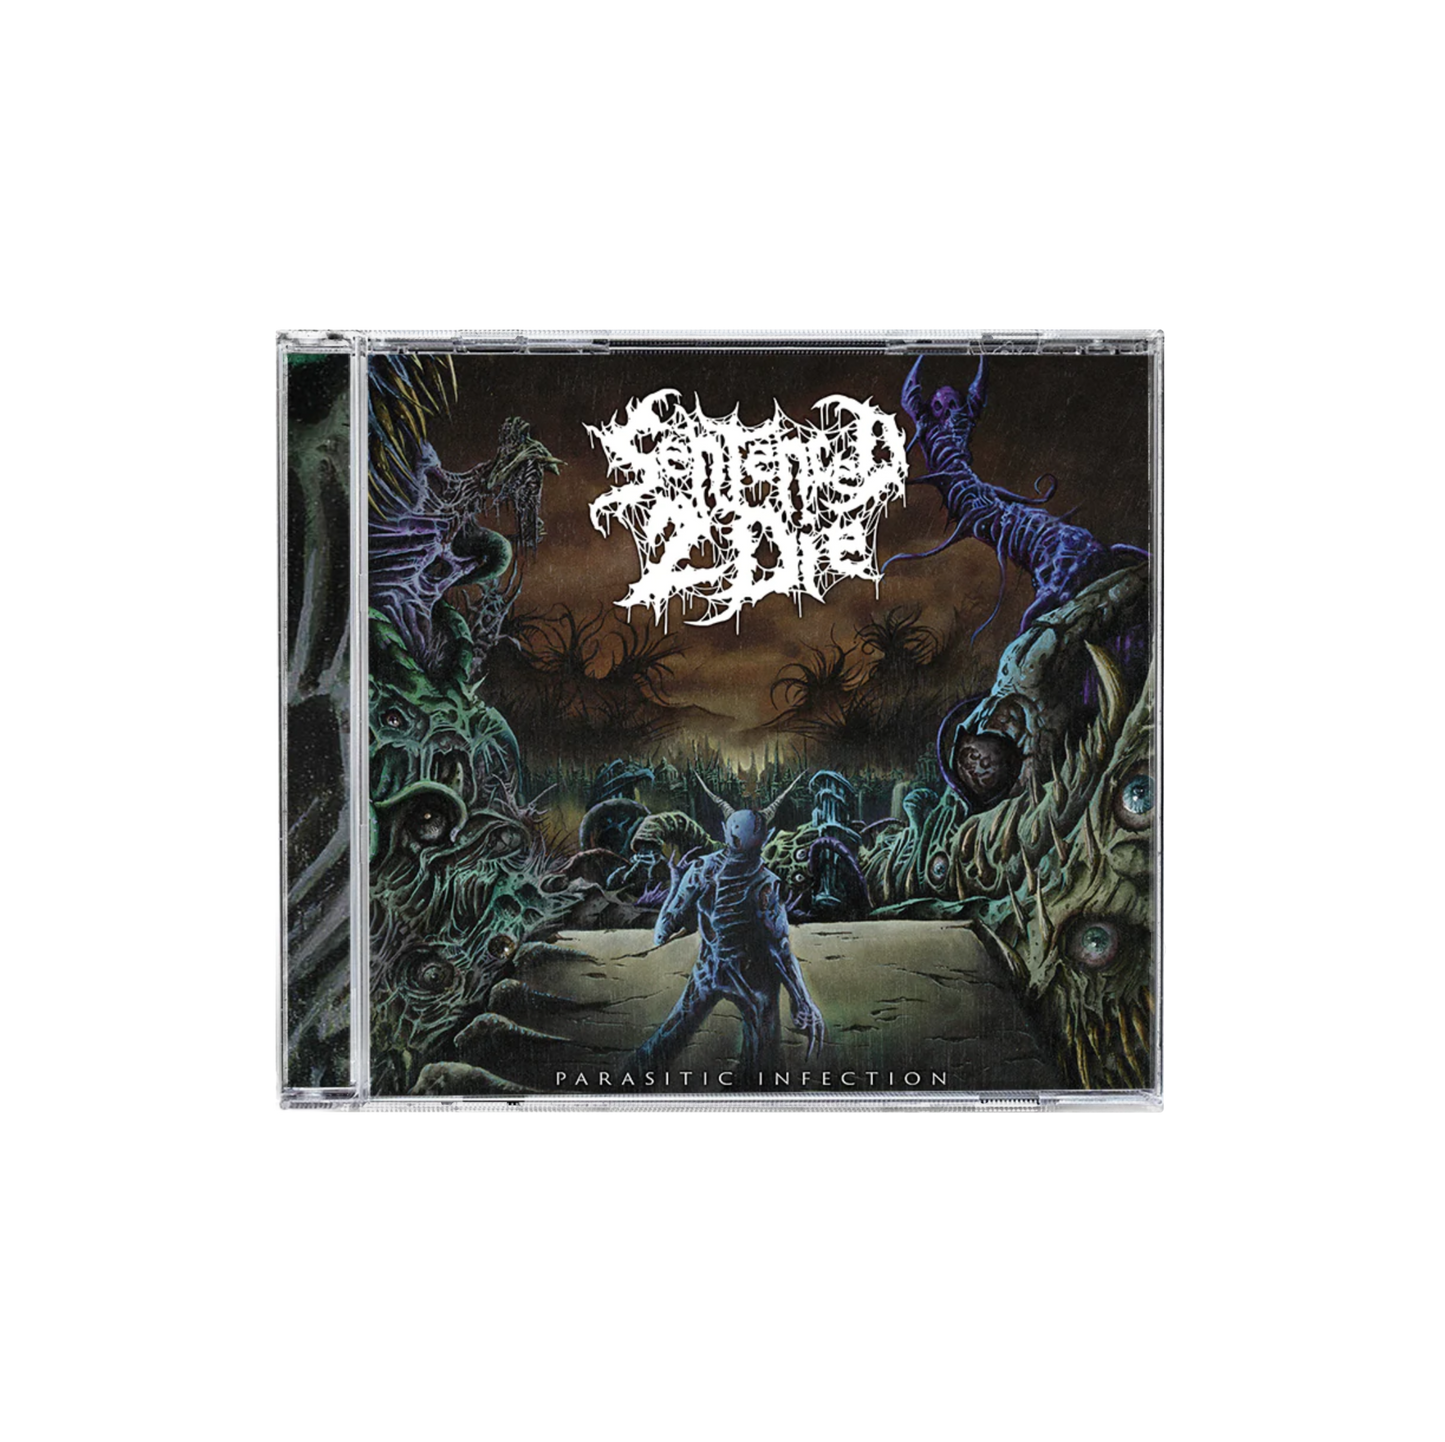 Sentenced 2 Die "Parasitic Infection" CD